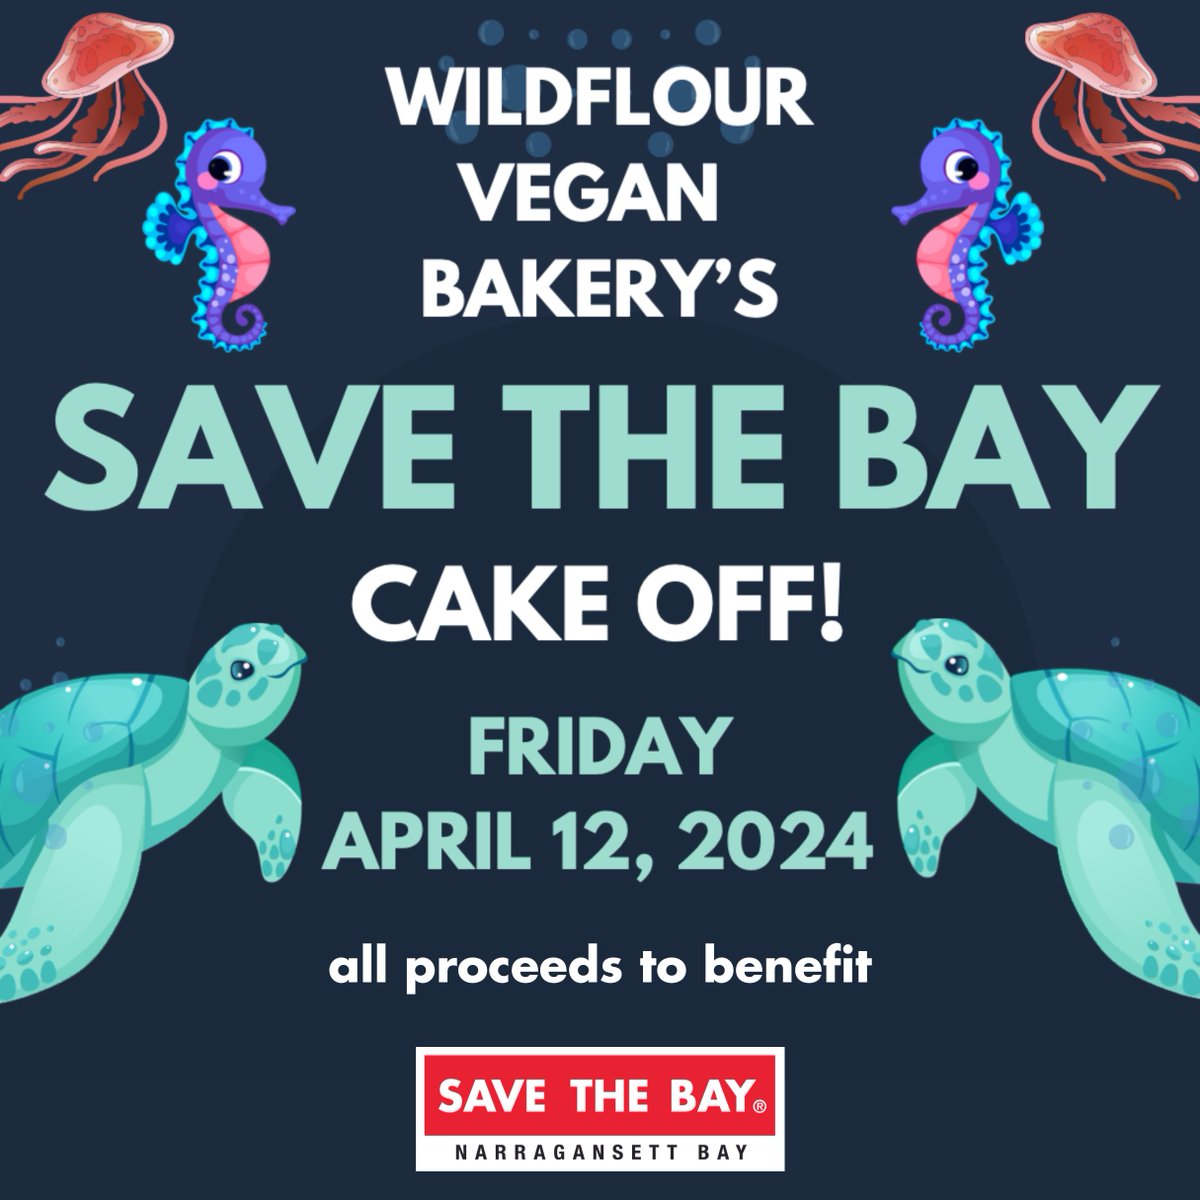 This Friday, treat yourself to a sweet while supporting Save The Bay! Wildflour Vegan Bakery in Pawtucket has selected Save The Bay as the non-profit for their April Cake Off & all proceeds from their Aquatic Themed Bake Off Contest will benefit STB. wildflourbakerycafe.com